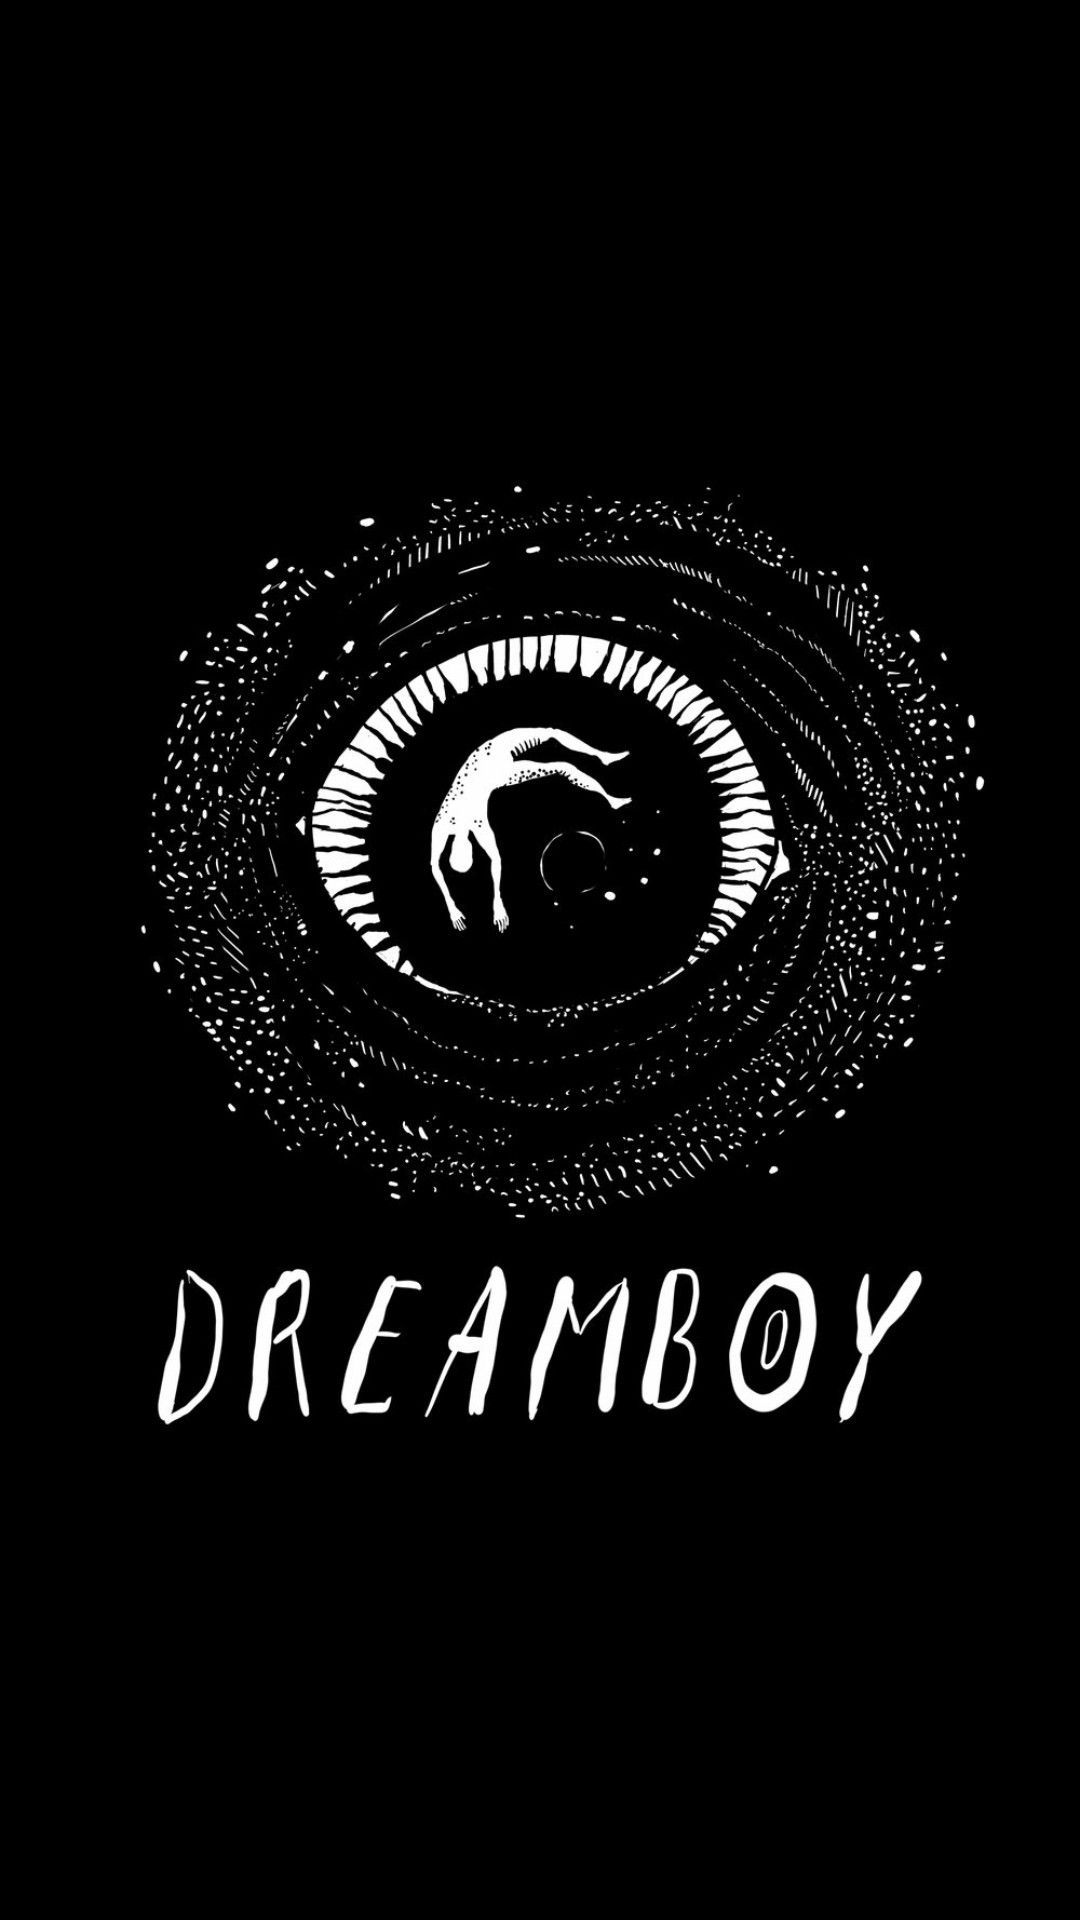 Dreamboy podcast wallpaper iphone. Aesthetic picture, Night vale presents, Podcasts